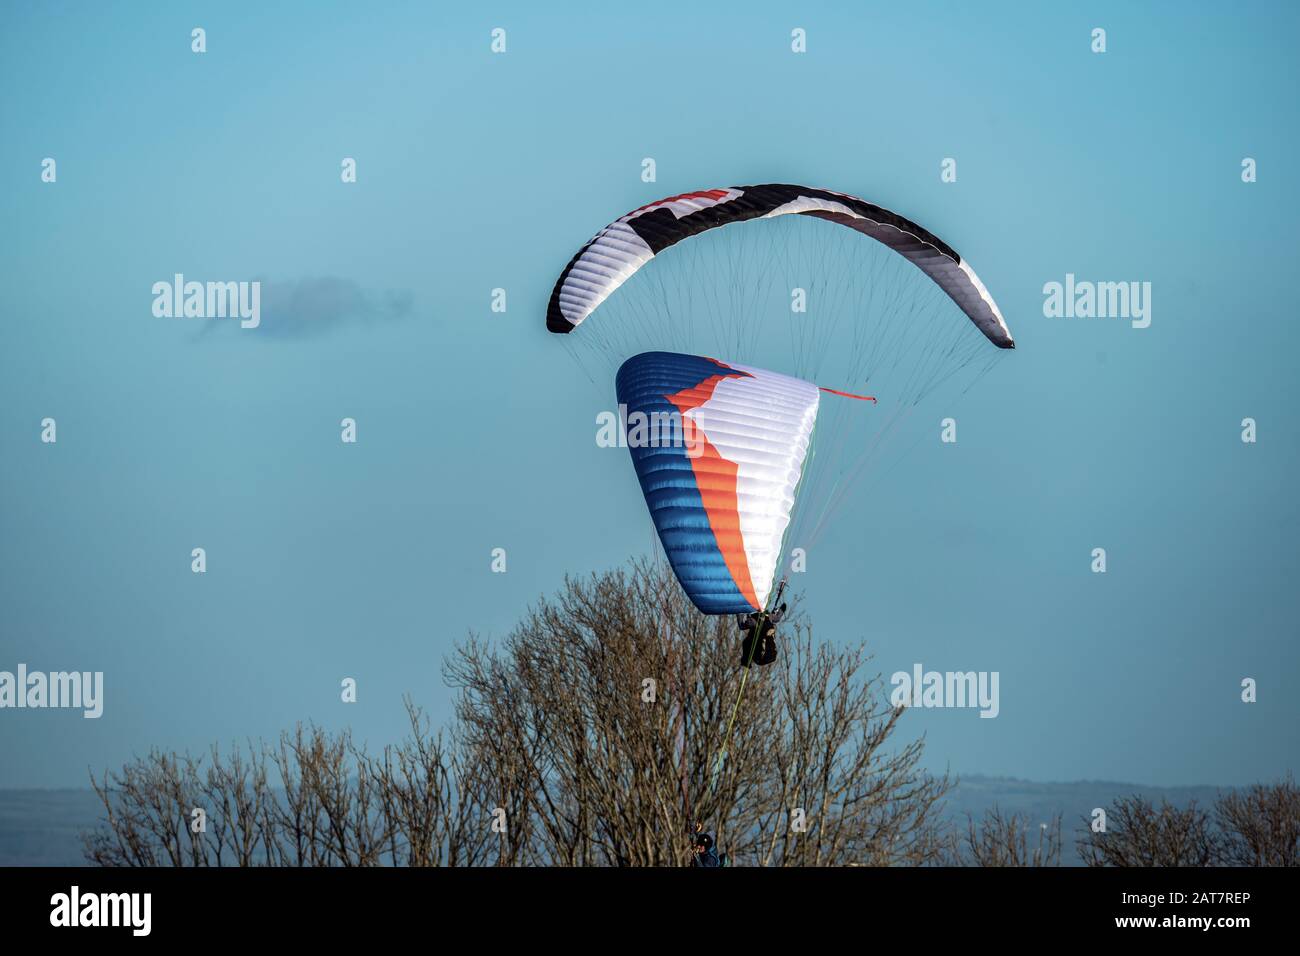 Paraglider and pilot at Firle Beacon, East Sussex, England Stock Photo